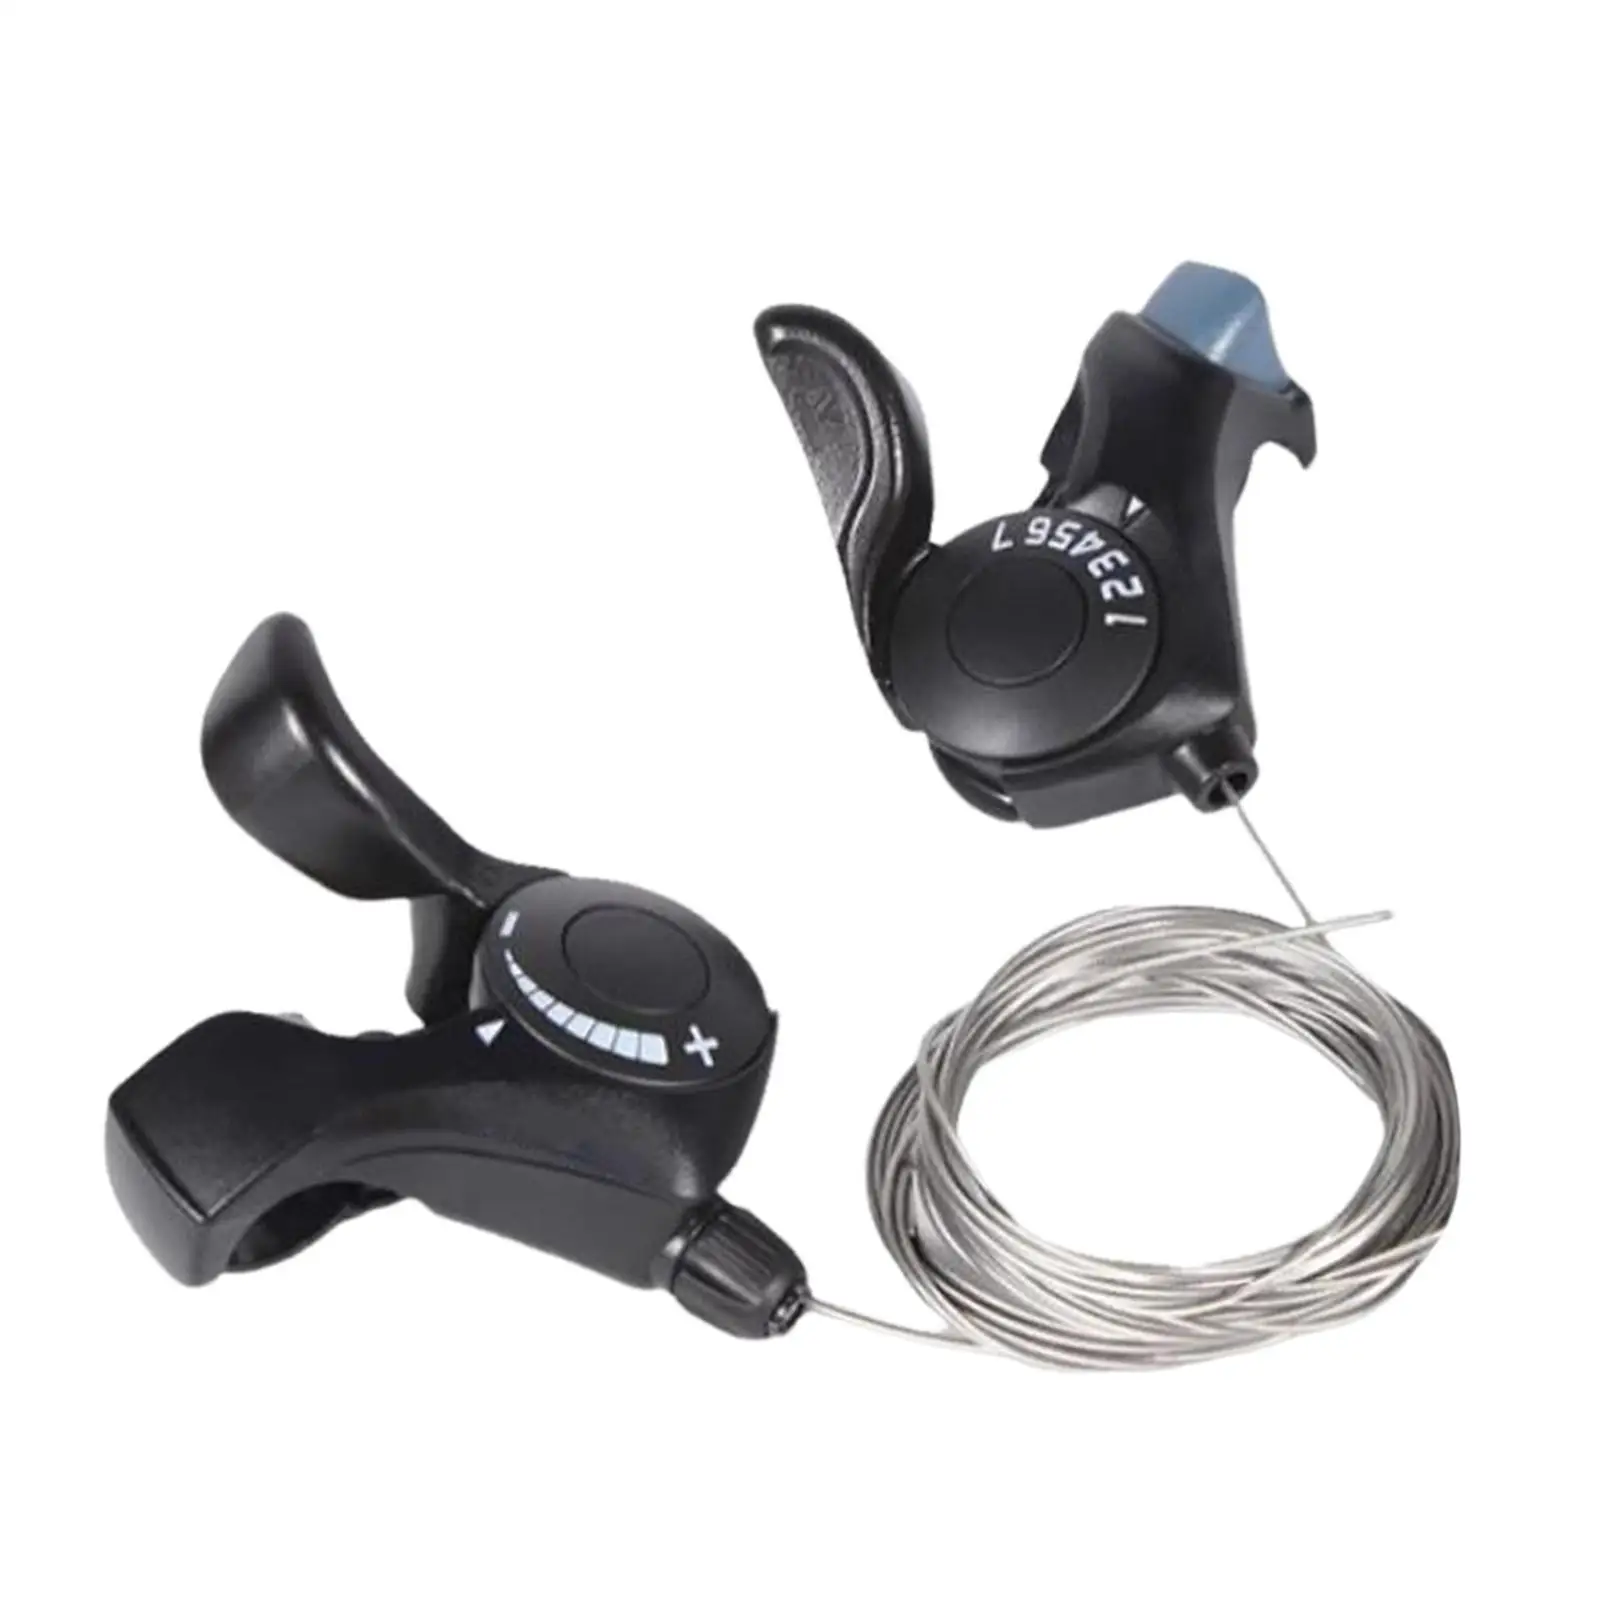 Bike Shifters Set Bicycle Left Right Lever Shifter Bike Thumb Gear Shifter for Bicycle Road Bike Outdoor Folding Bike Supplies